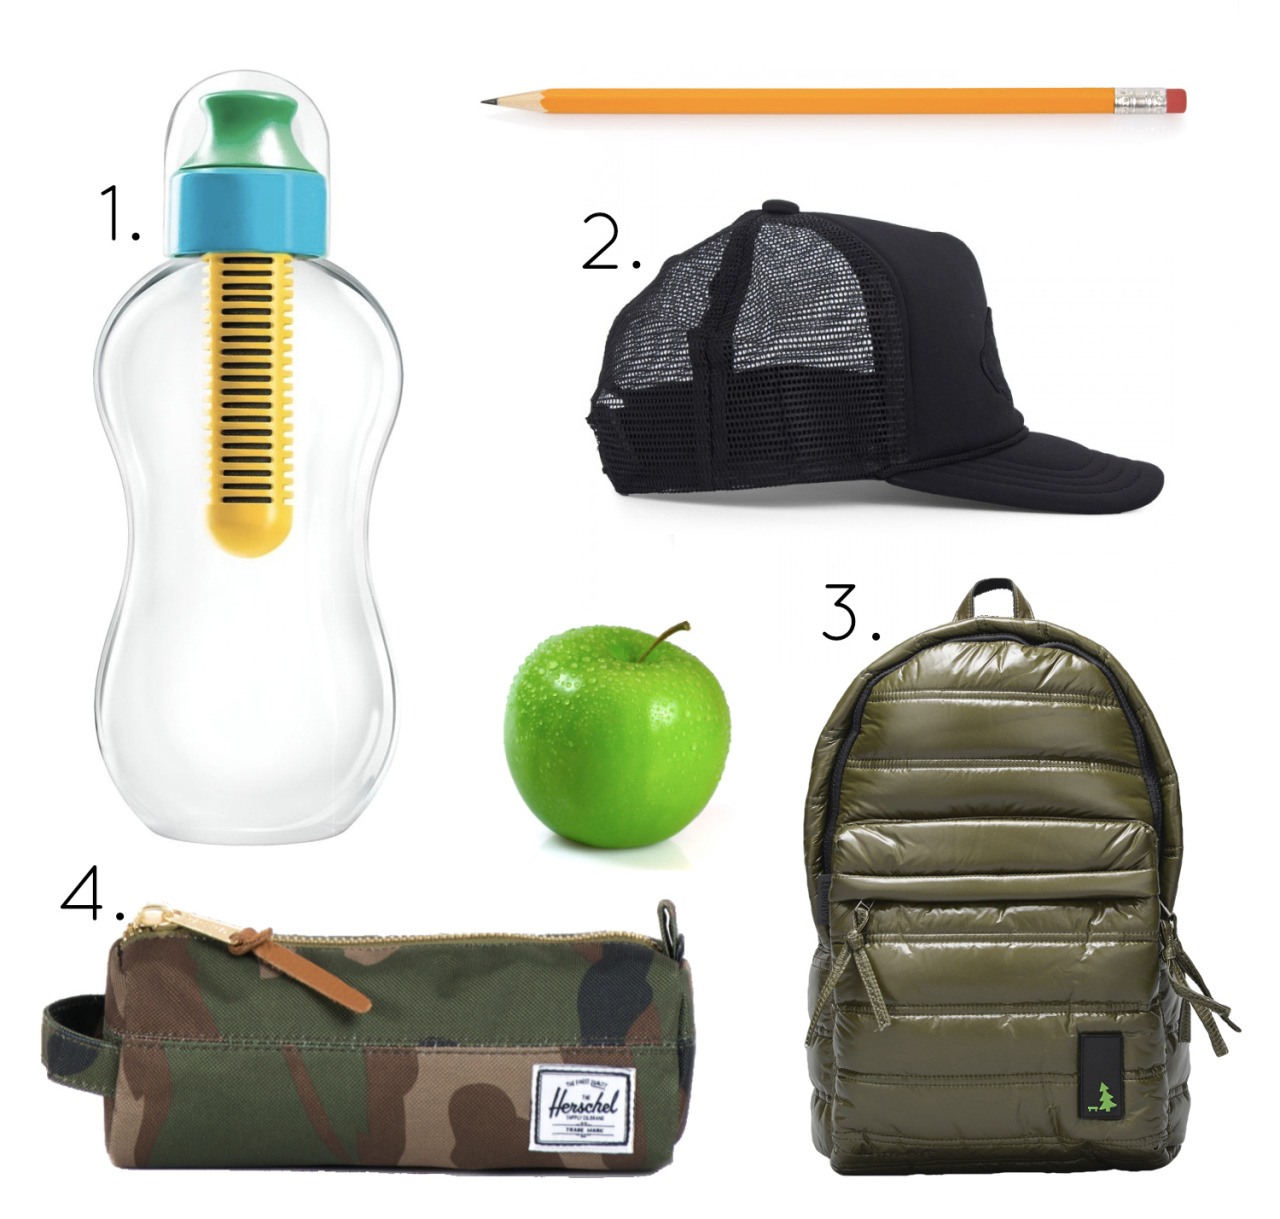 Just a few necessities for next weeks school start.
1. Filter water bottle by OXO TOT
2. Black catch trucker hat by Vans
3. Back pack by MUESLII @ Orange Mayonnaise
4. Settlement case by Herschel @ Orange Mayonnaise

We ♥ them